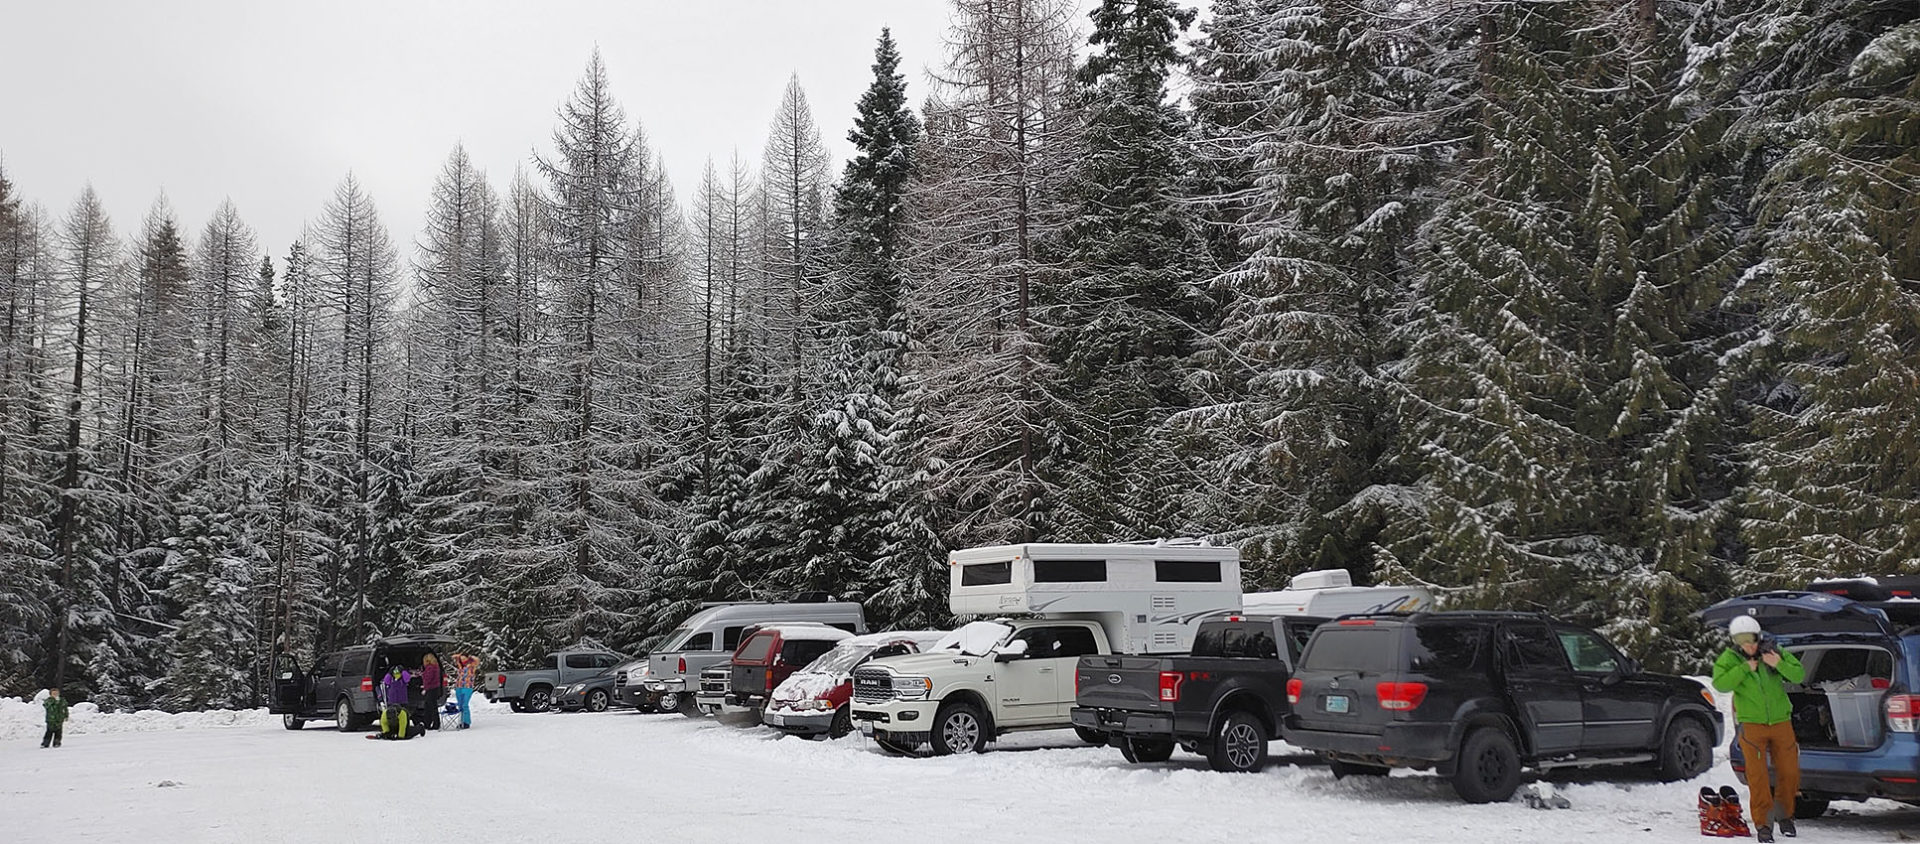 41 Ski Resorts Where You Can Camp in the Parking Lot